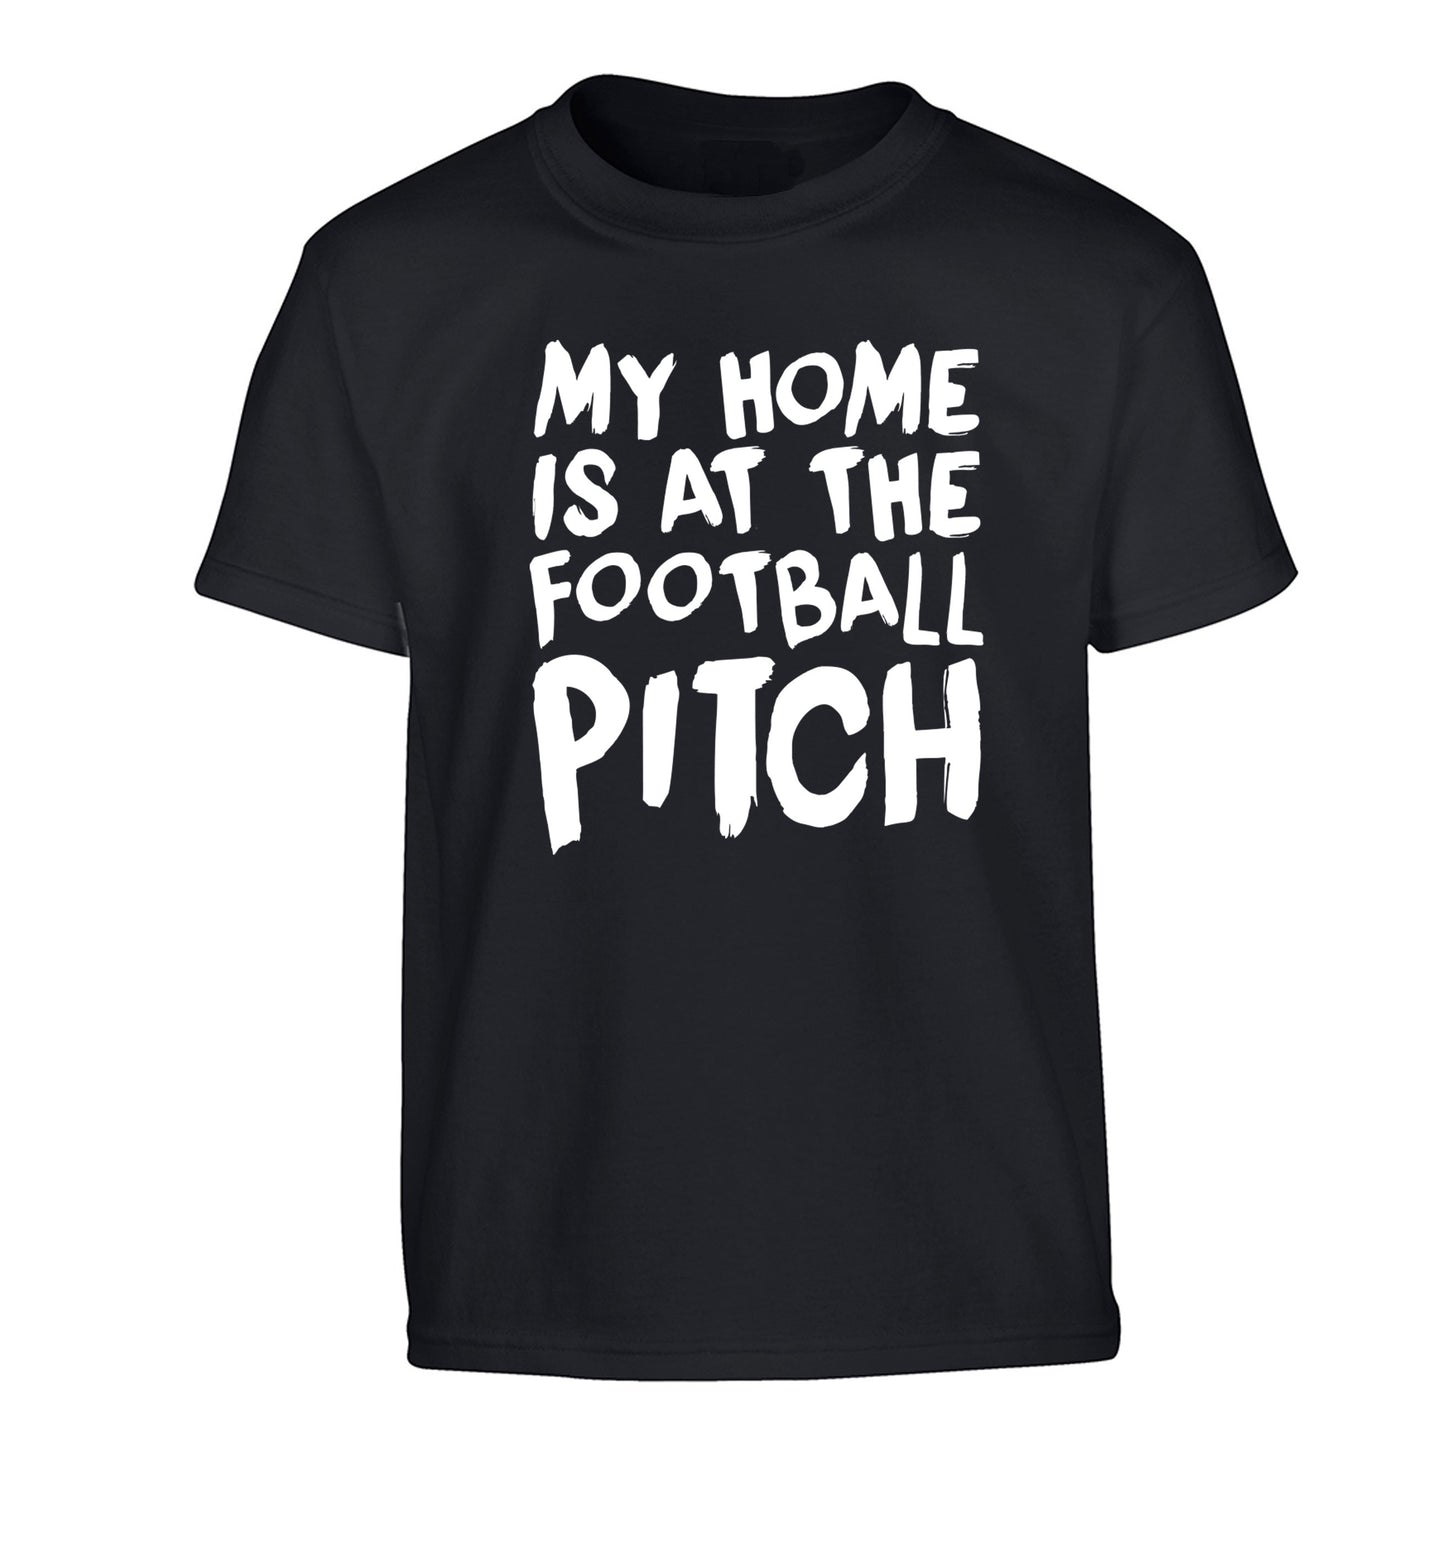 My home is at the football pitch Children's black Tshirt 12-14 Years